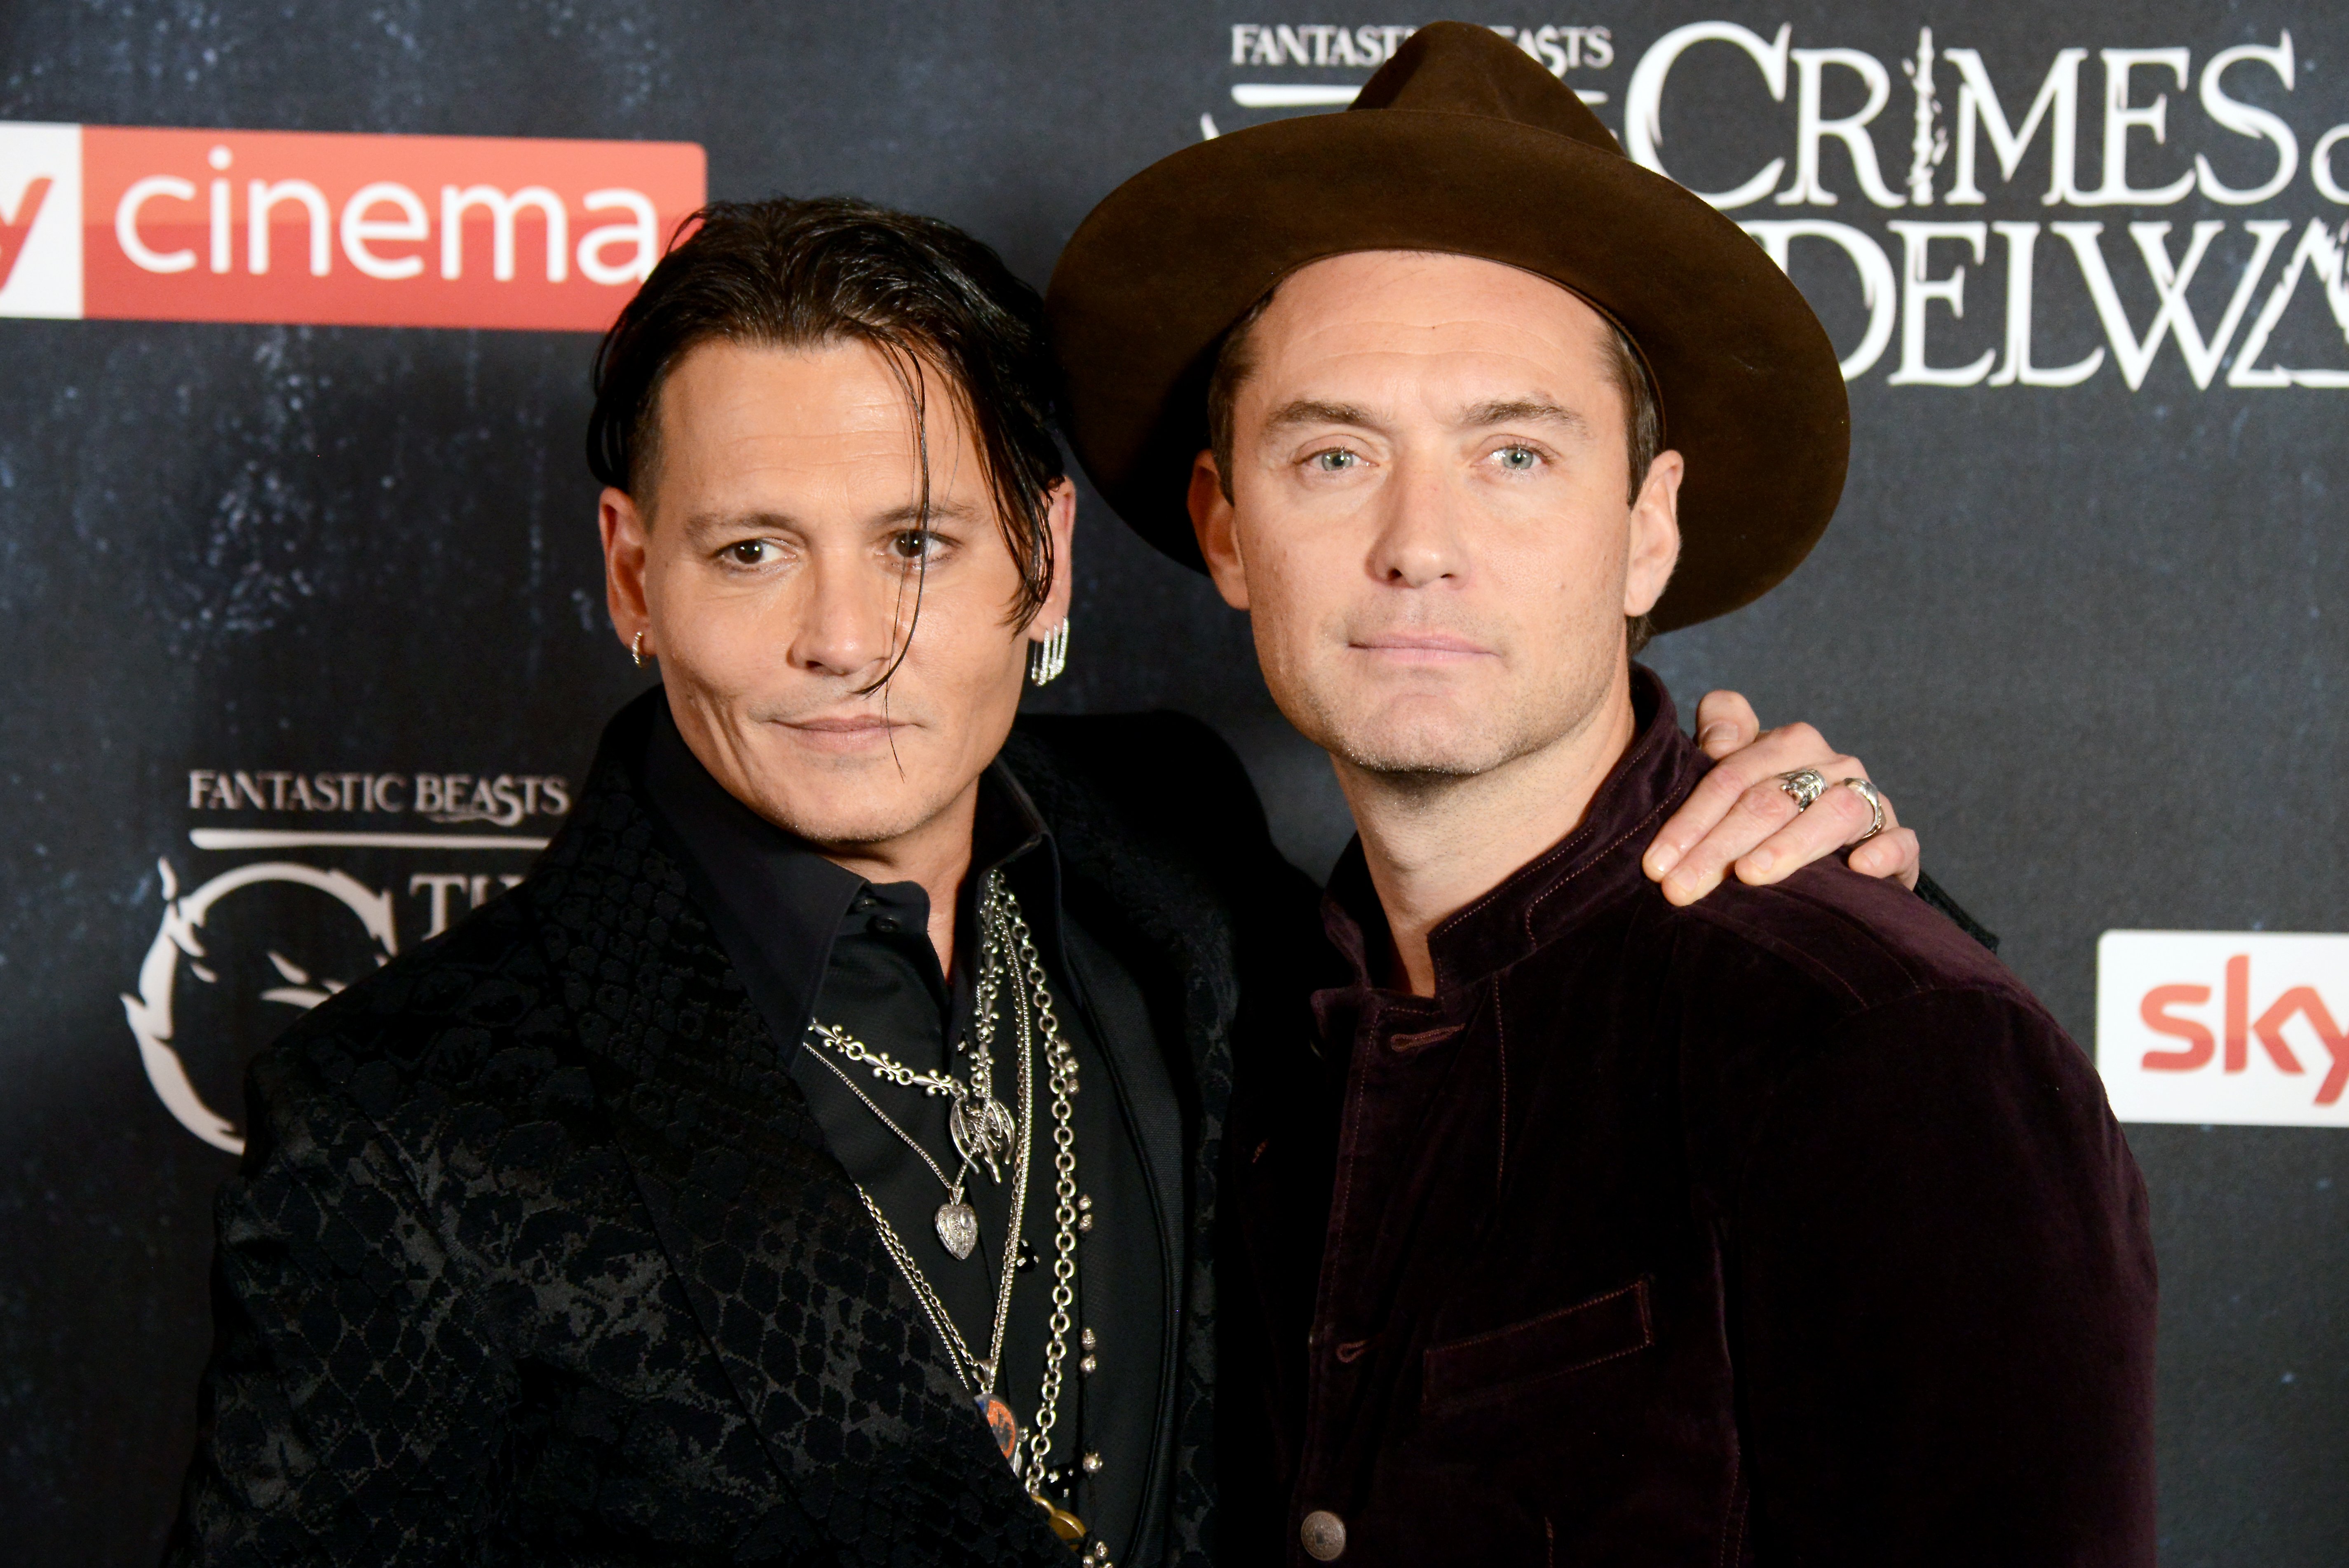 Johnny Depp (L) and Jude Law attend 'Fantastic Beasts: The Crimes Of Grindelwald' UK Premiere at Cineworld Leicester Square on November 13, 2018 in London, England. | Source: Getty Images